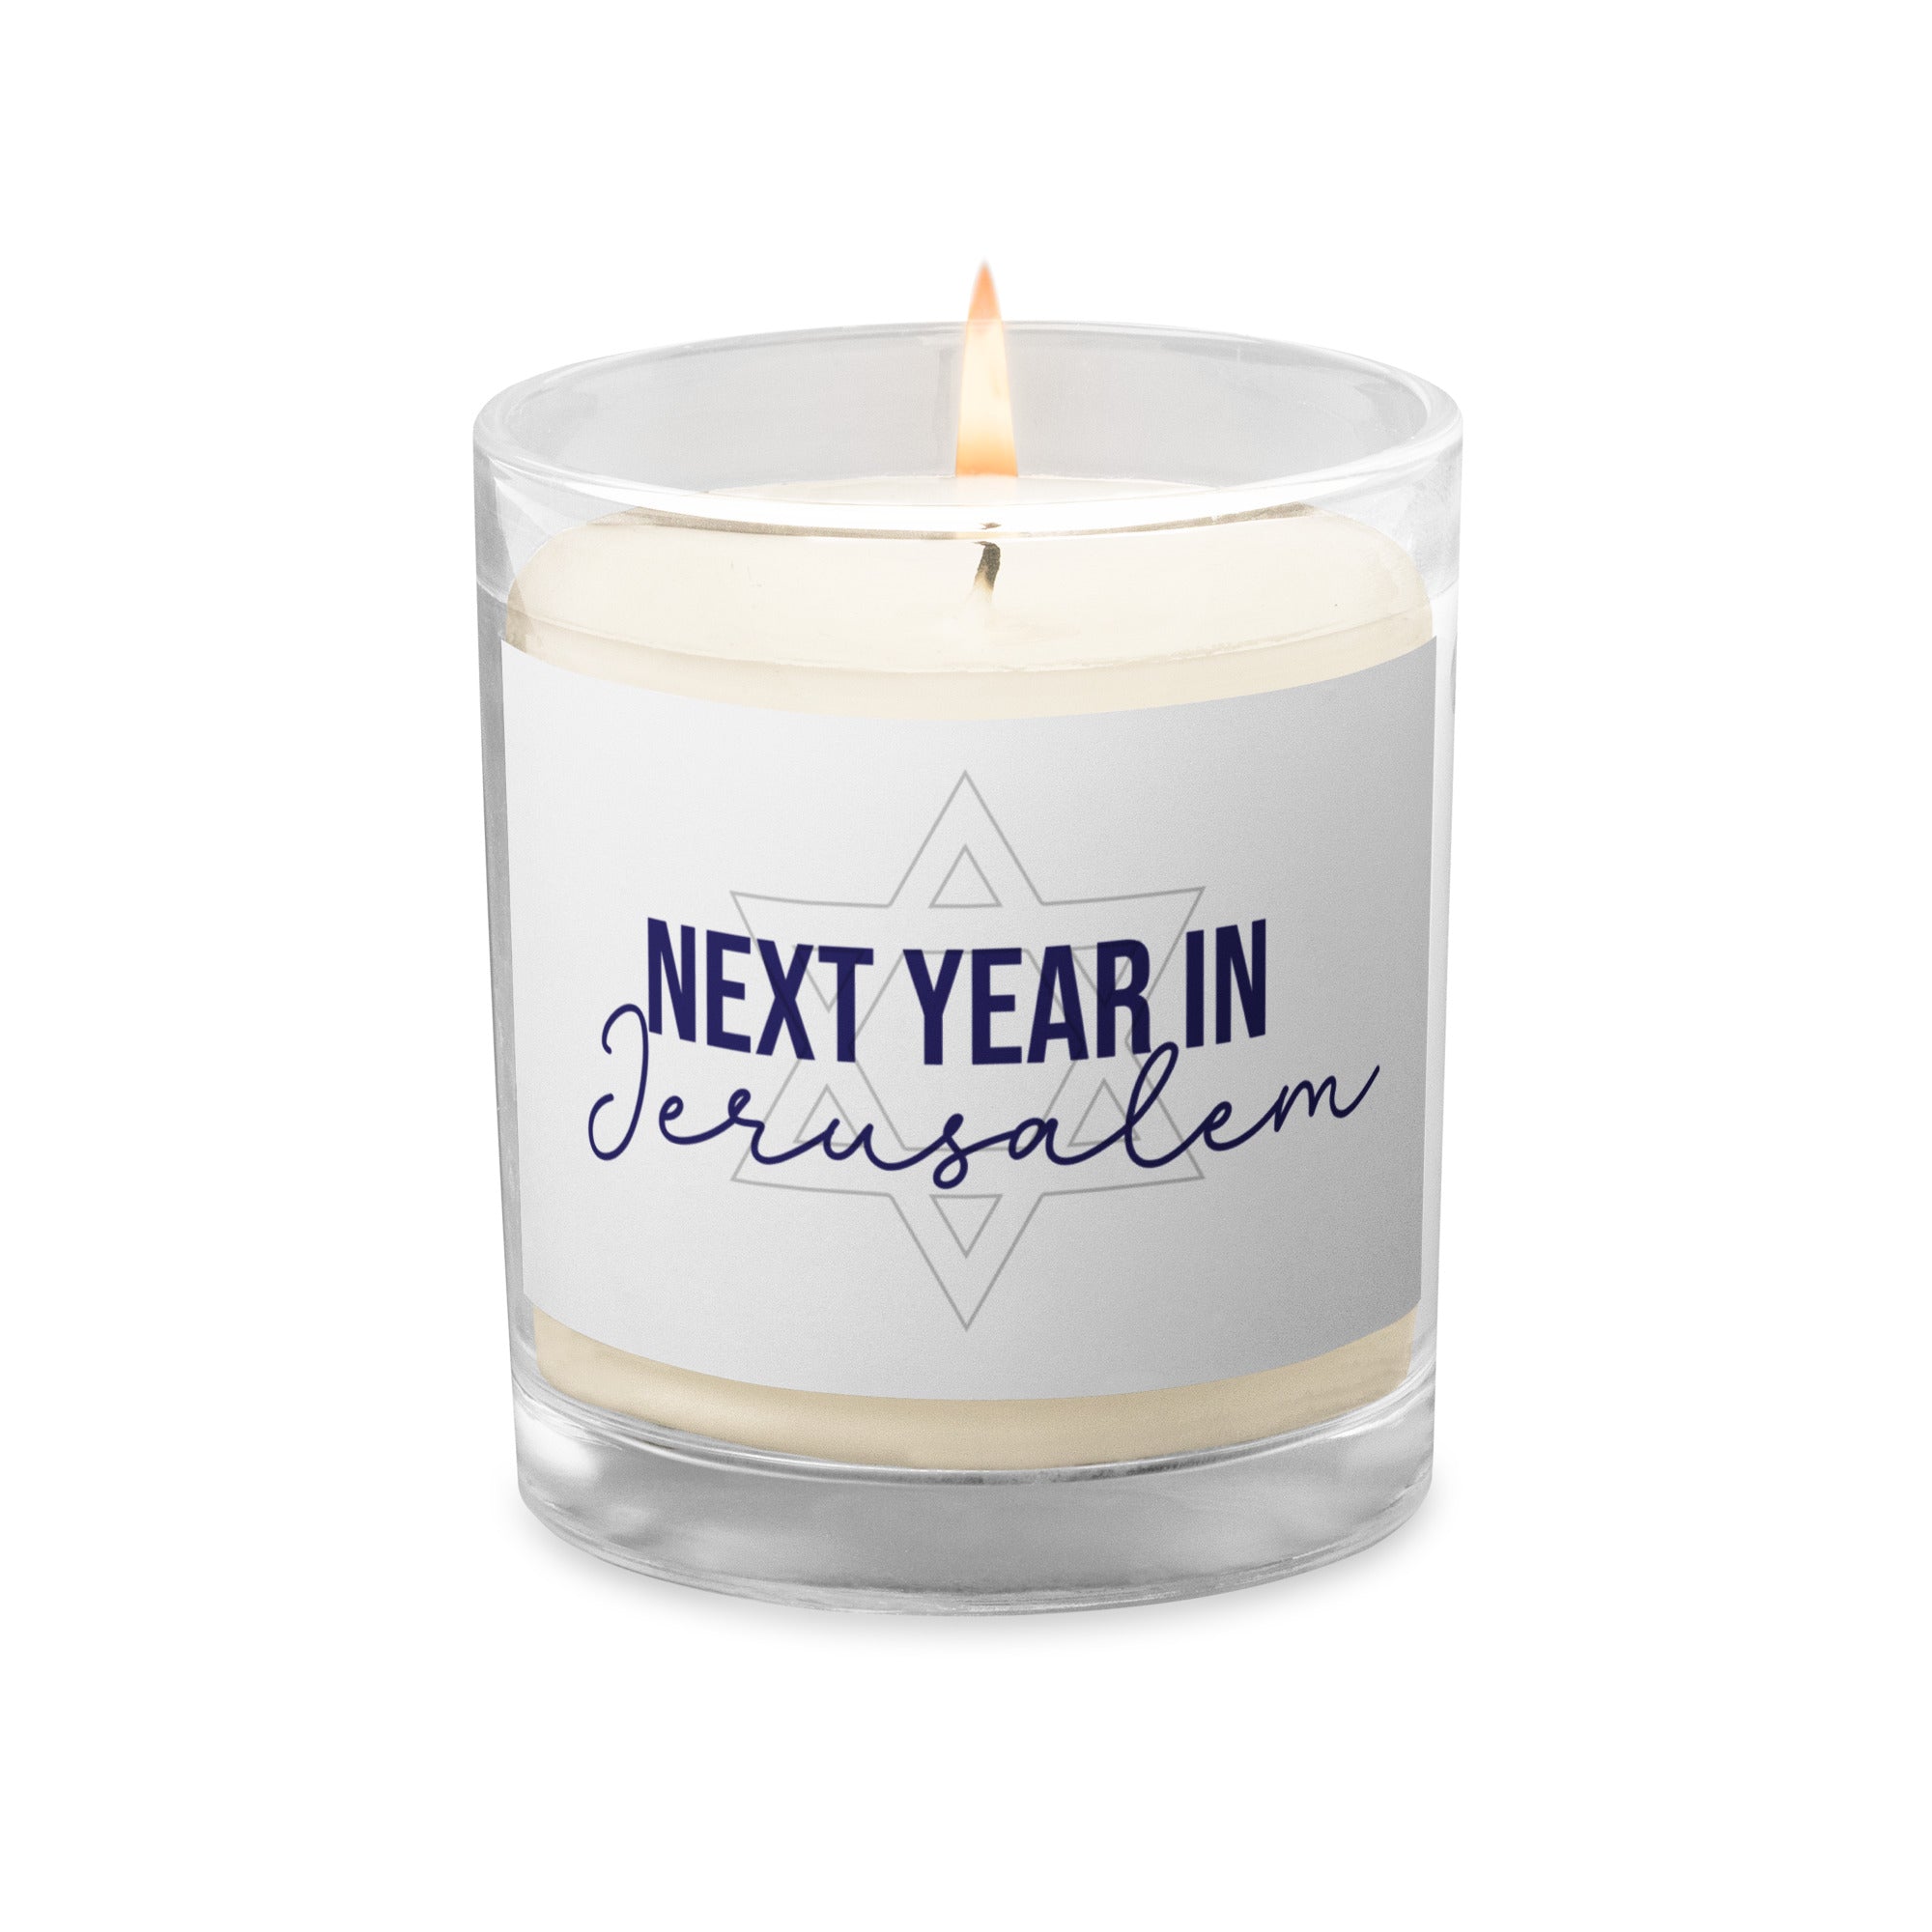 Next Year in Jerusalem Passover Glass jar soy wax candle Salt and Sparkle